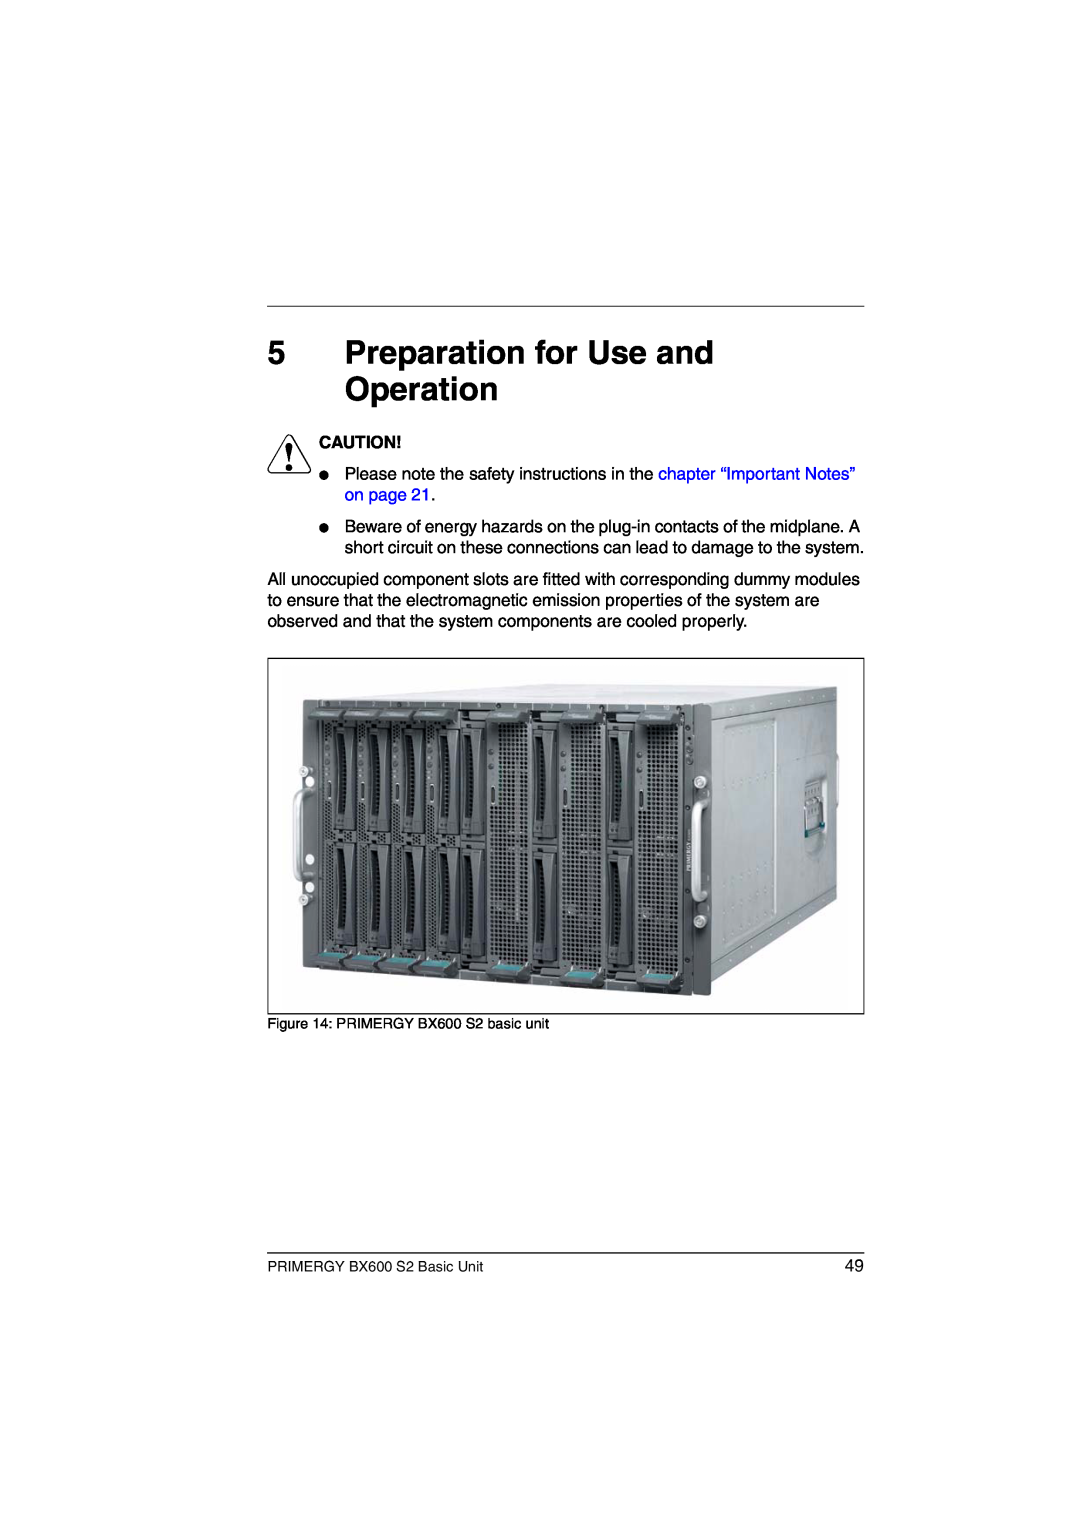 Fujitsu BX600 S2 manual Preparation for Use and Operation, V Caution 